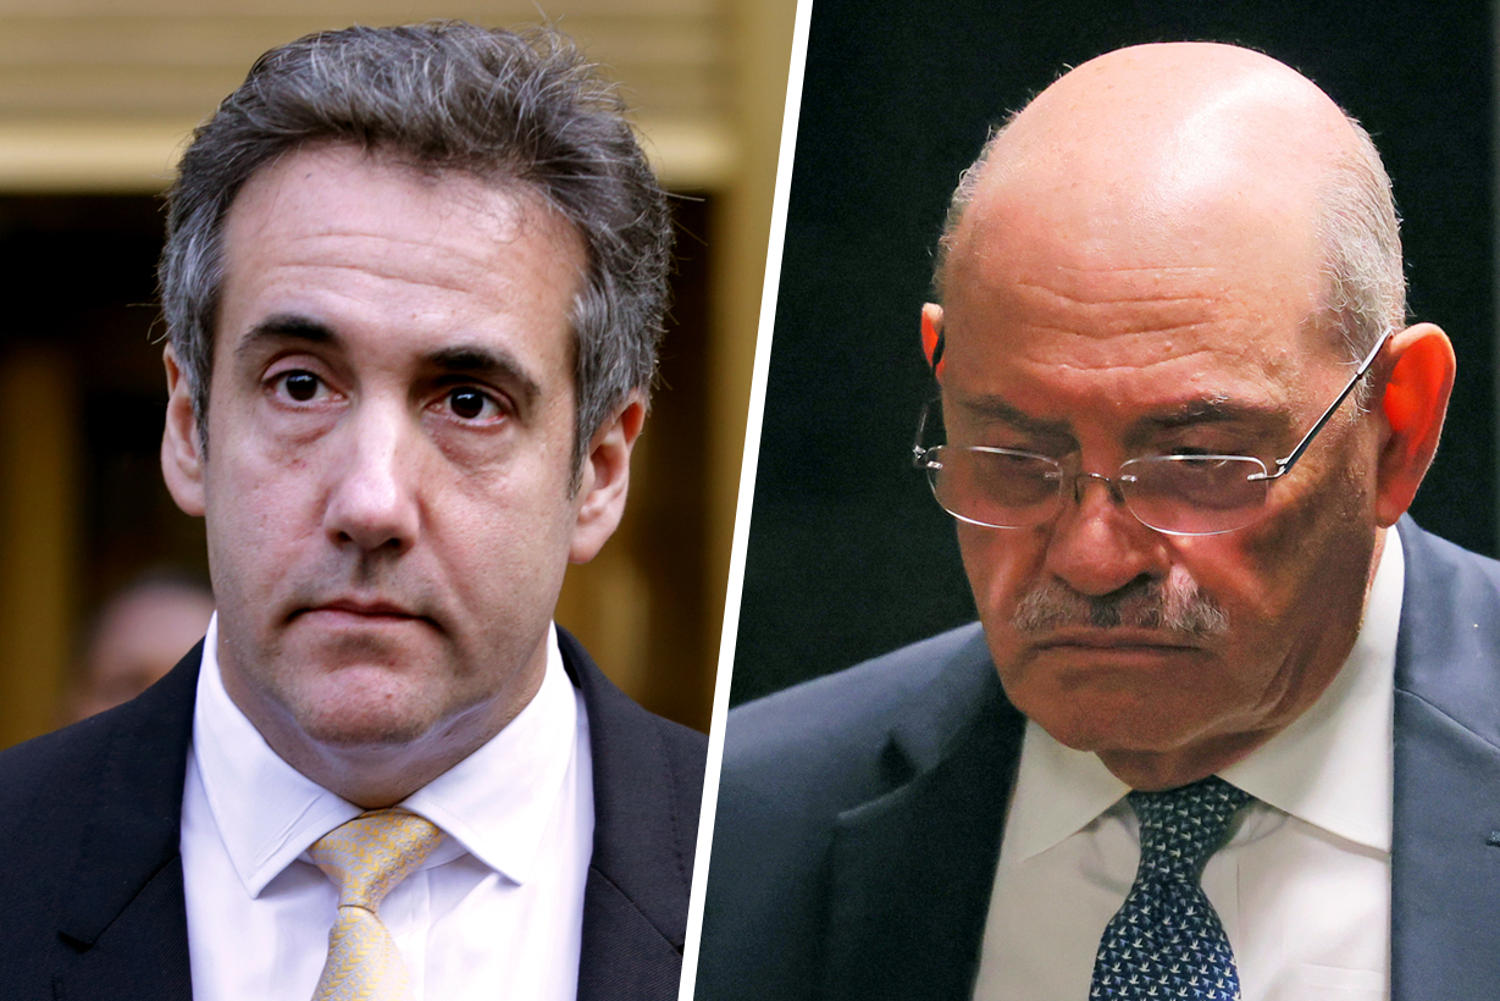 Weisselberg and Cohen developments present Team Trump with some tough choices